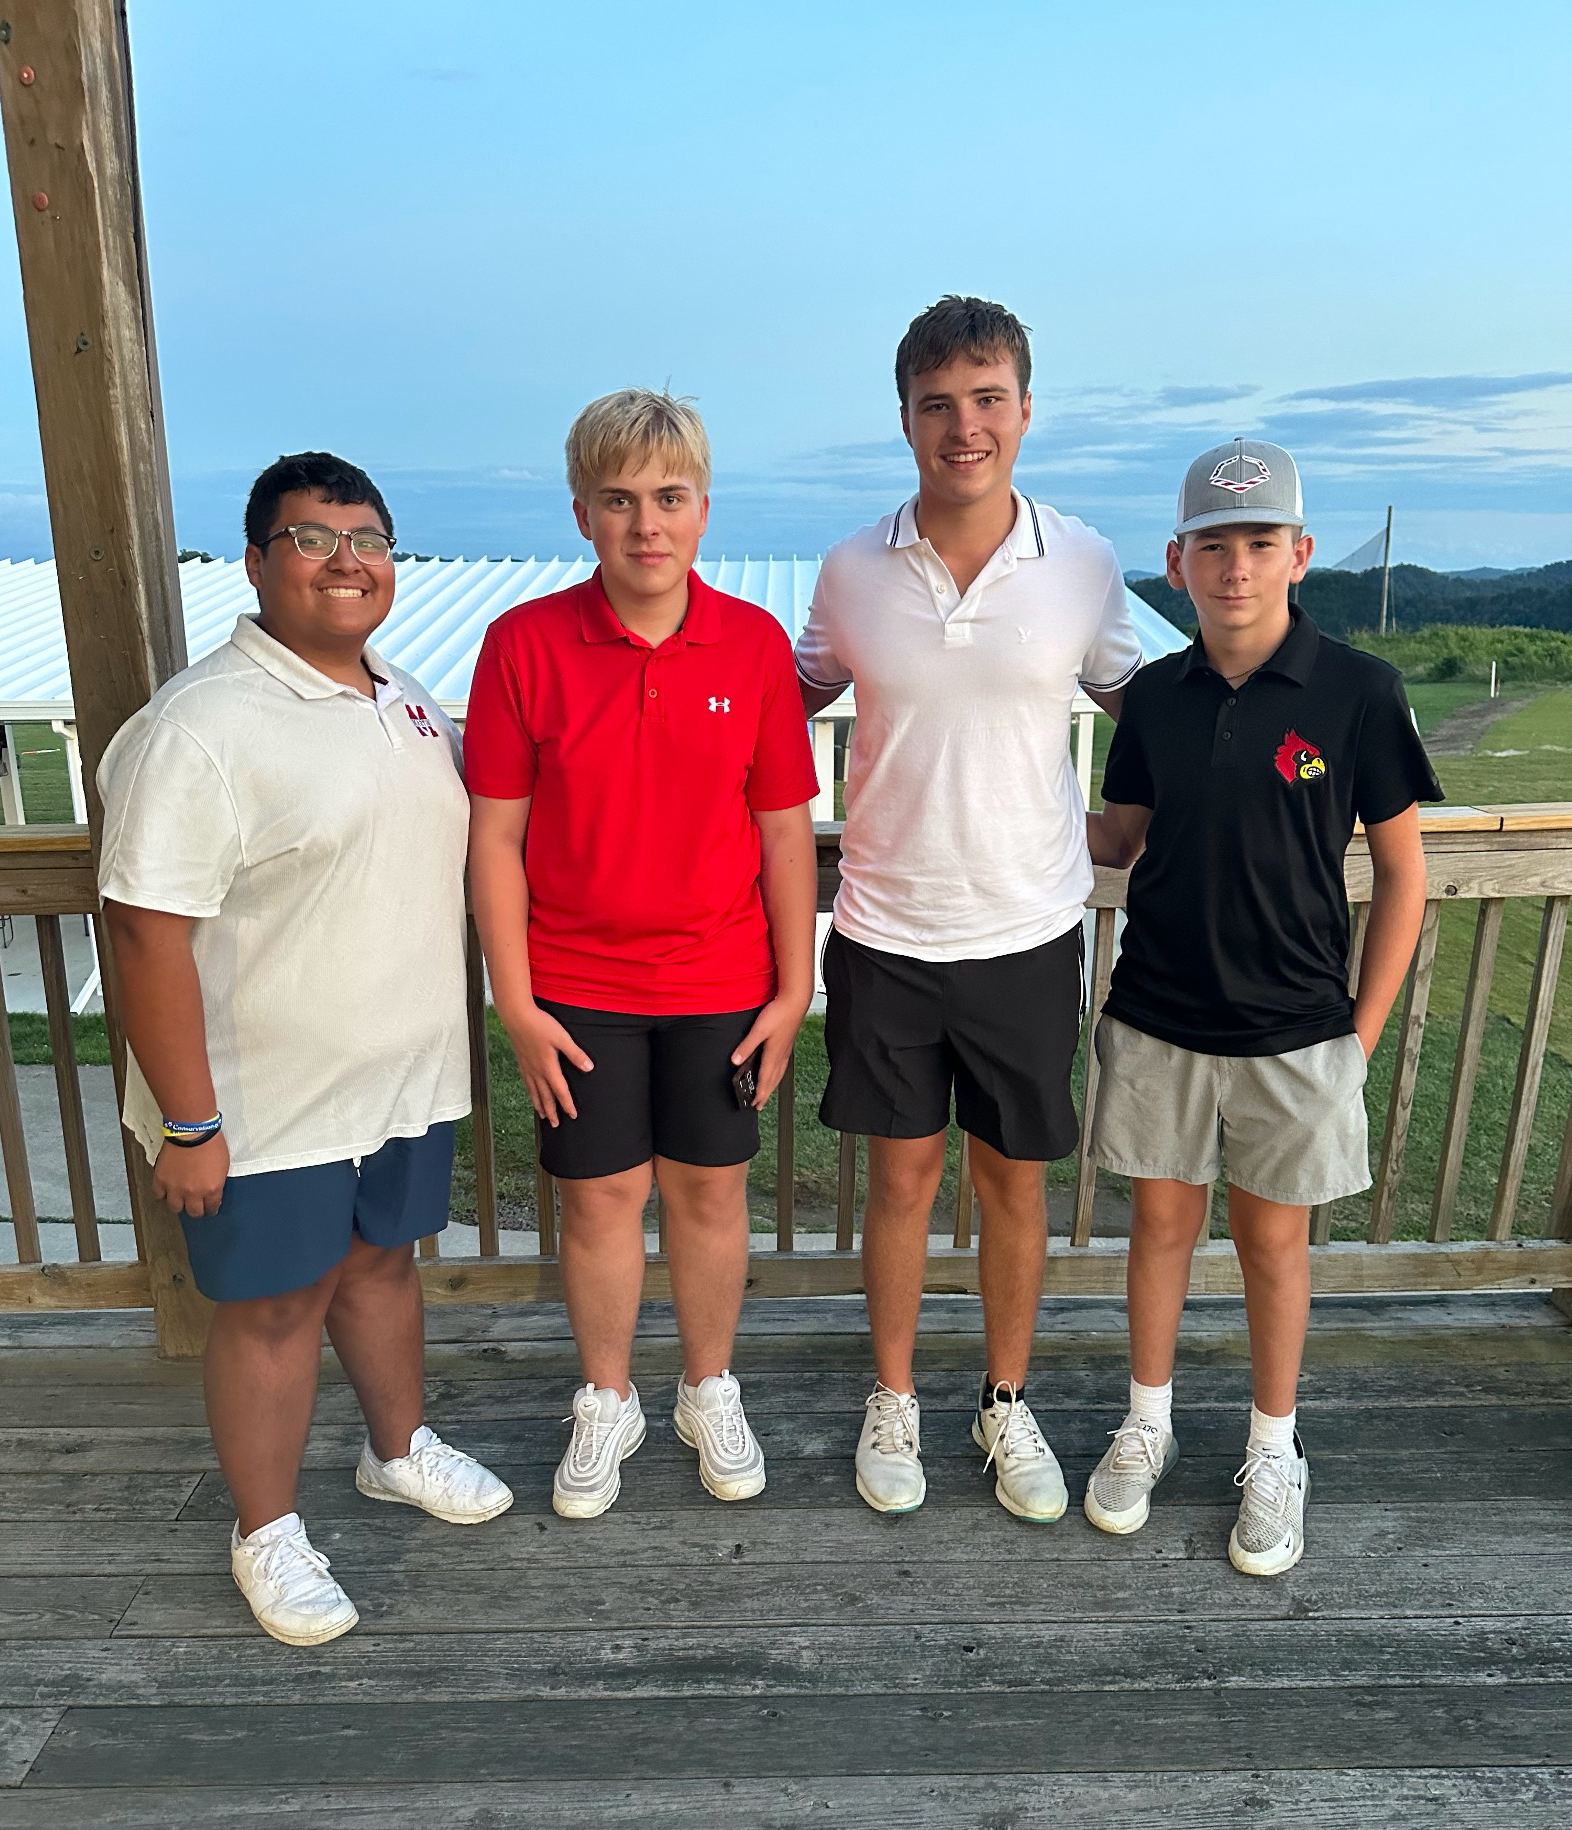 James emerges as top golfer in 9-hole match at Stonecrest